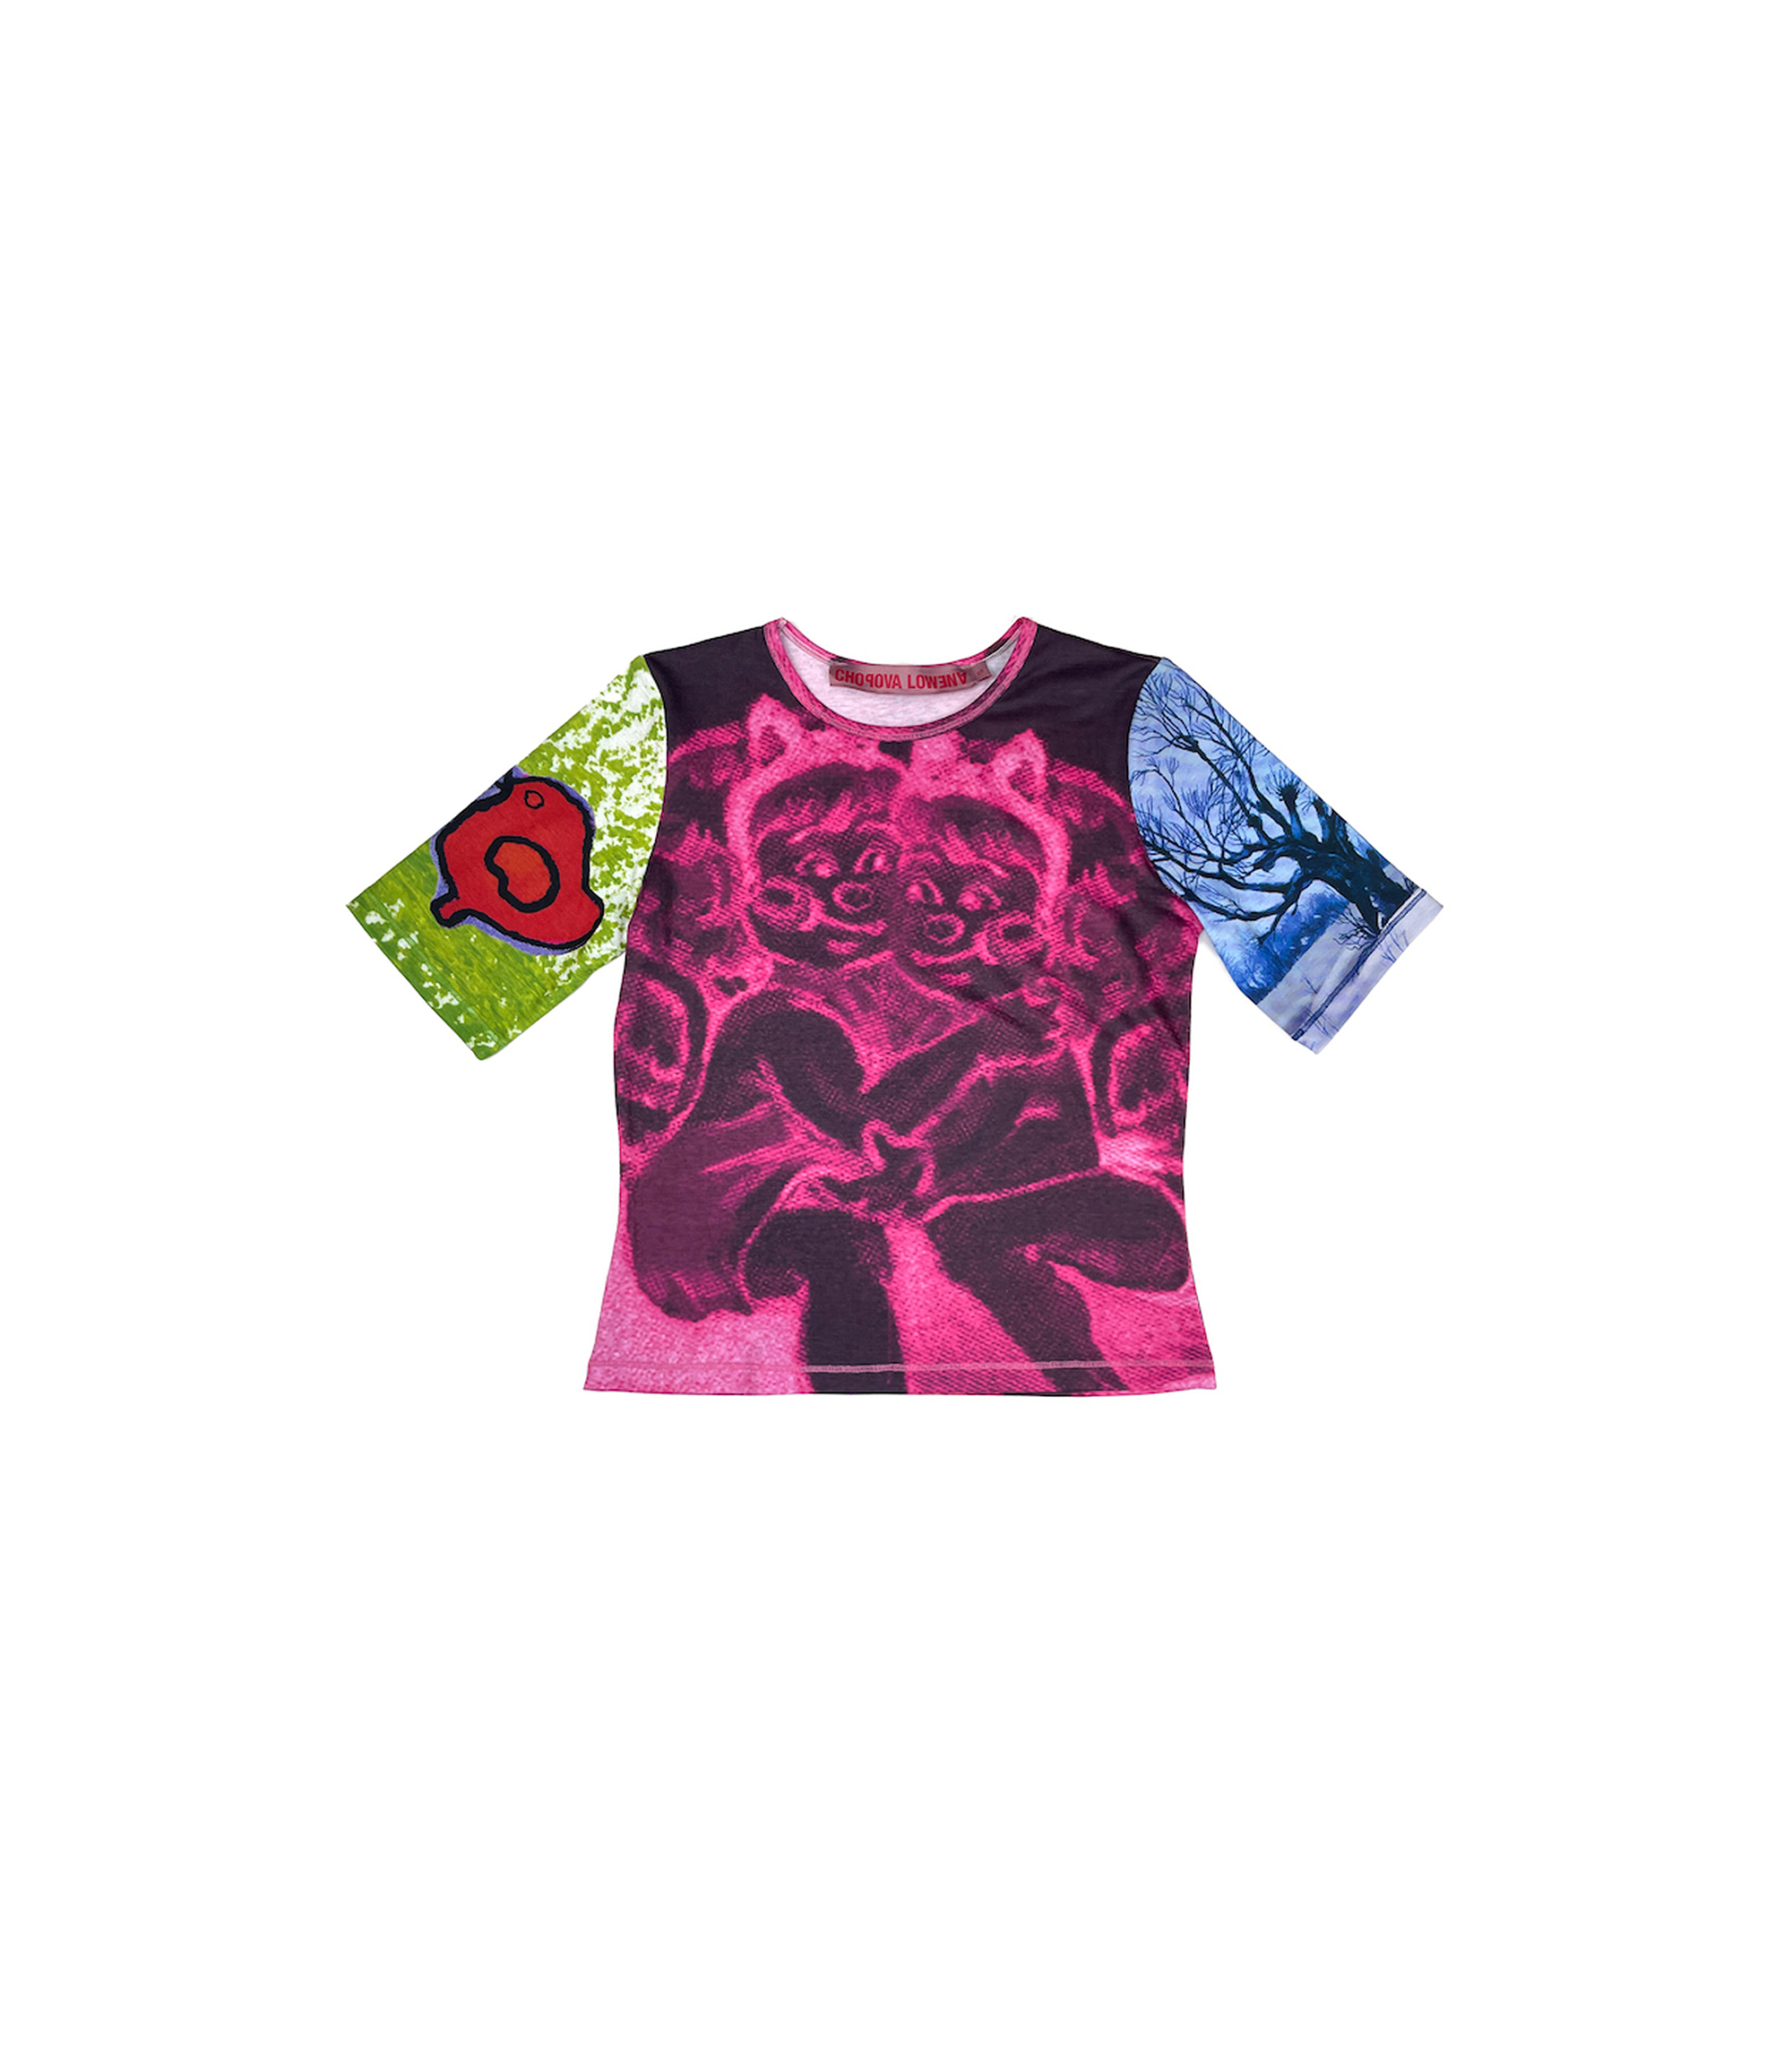 X-ray Devils Fitted Jersey Top - Multi